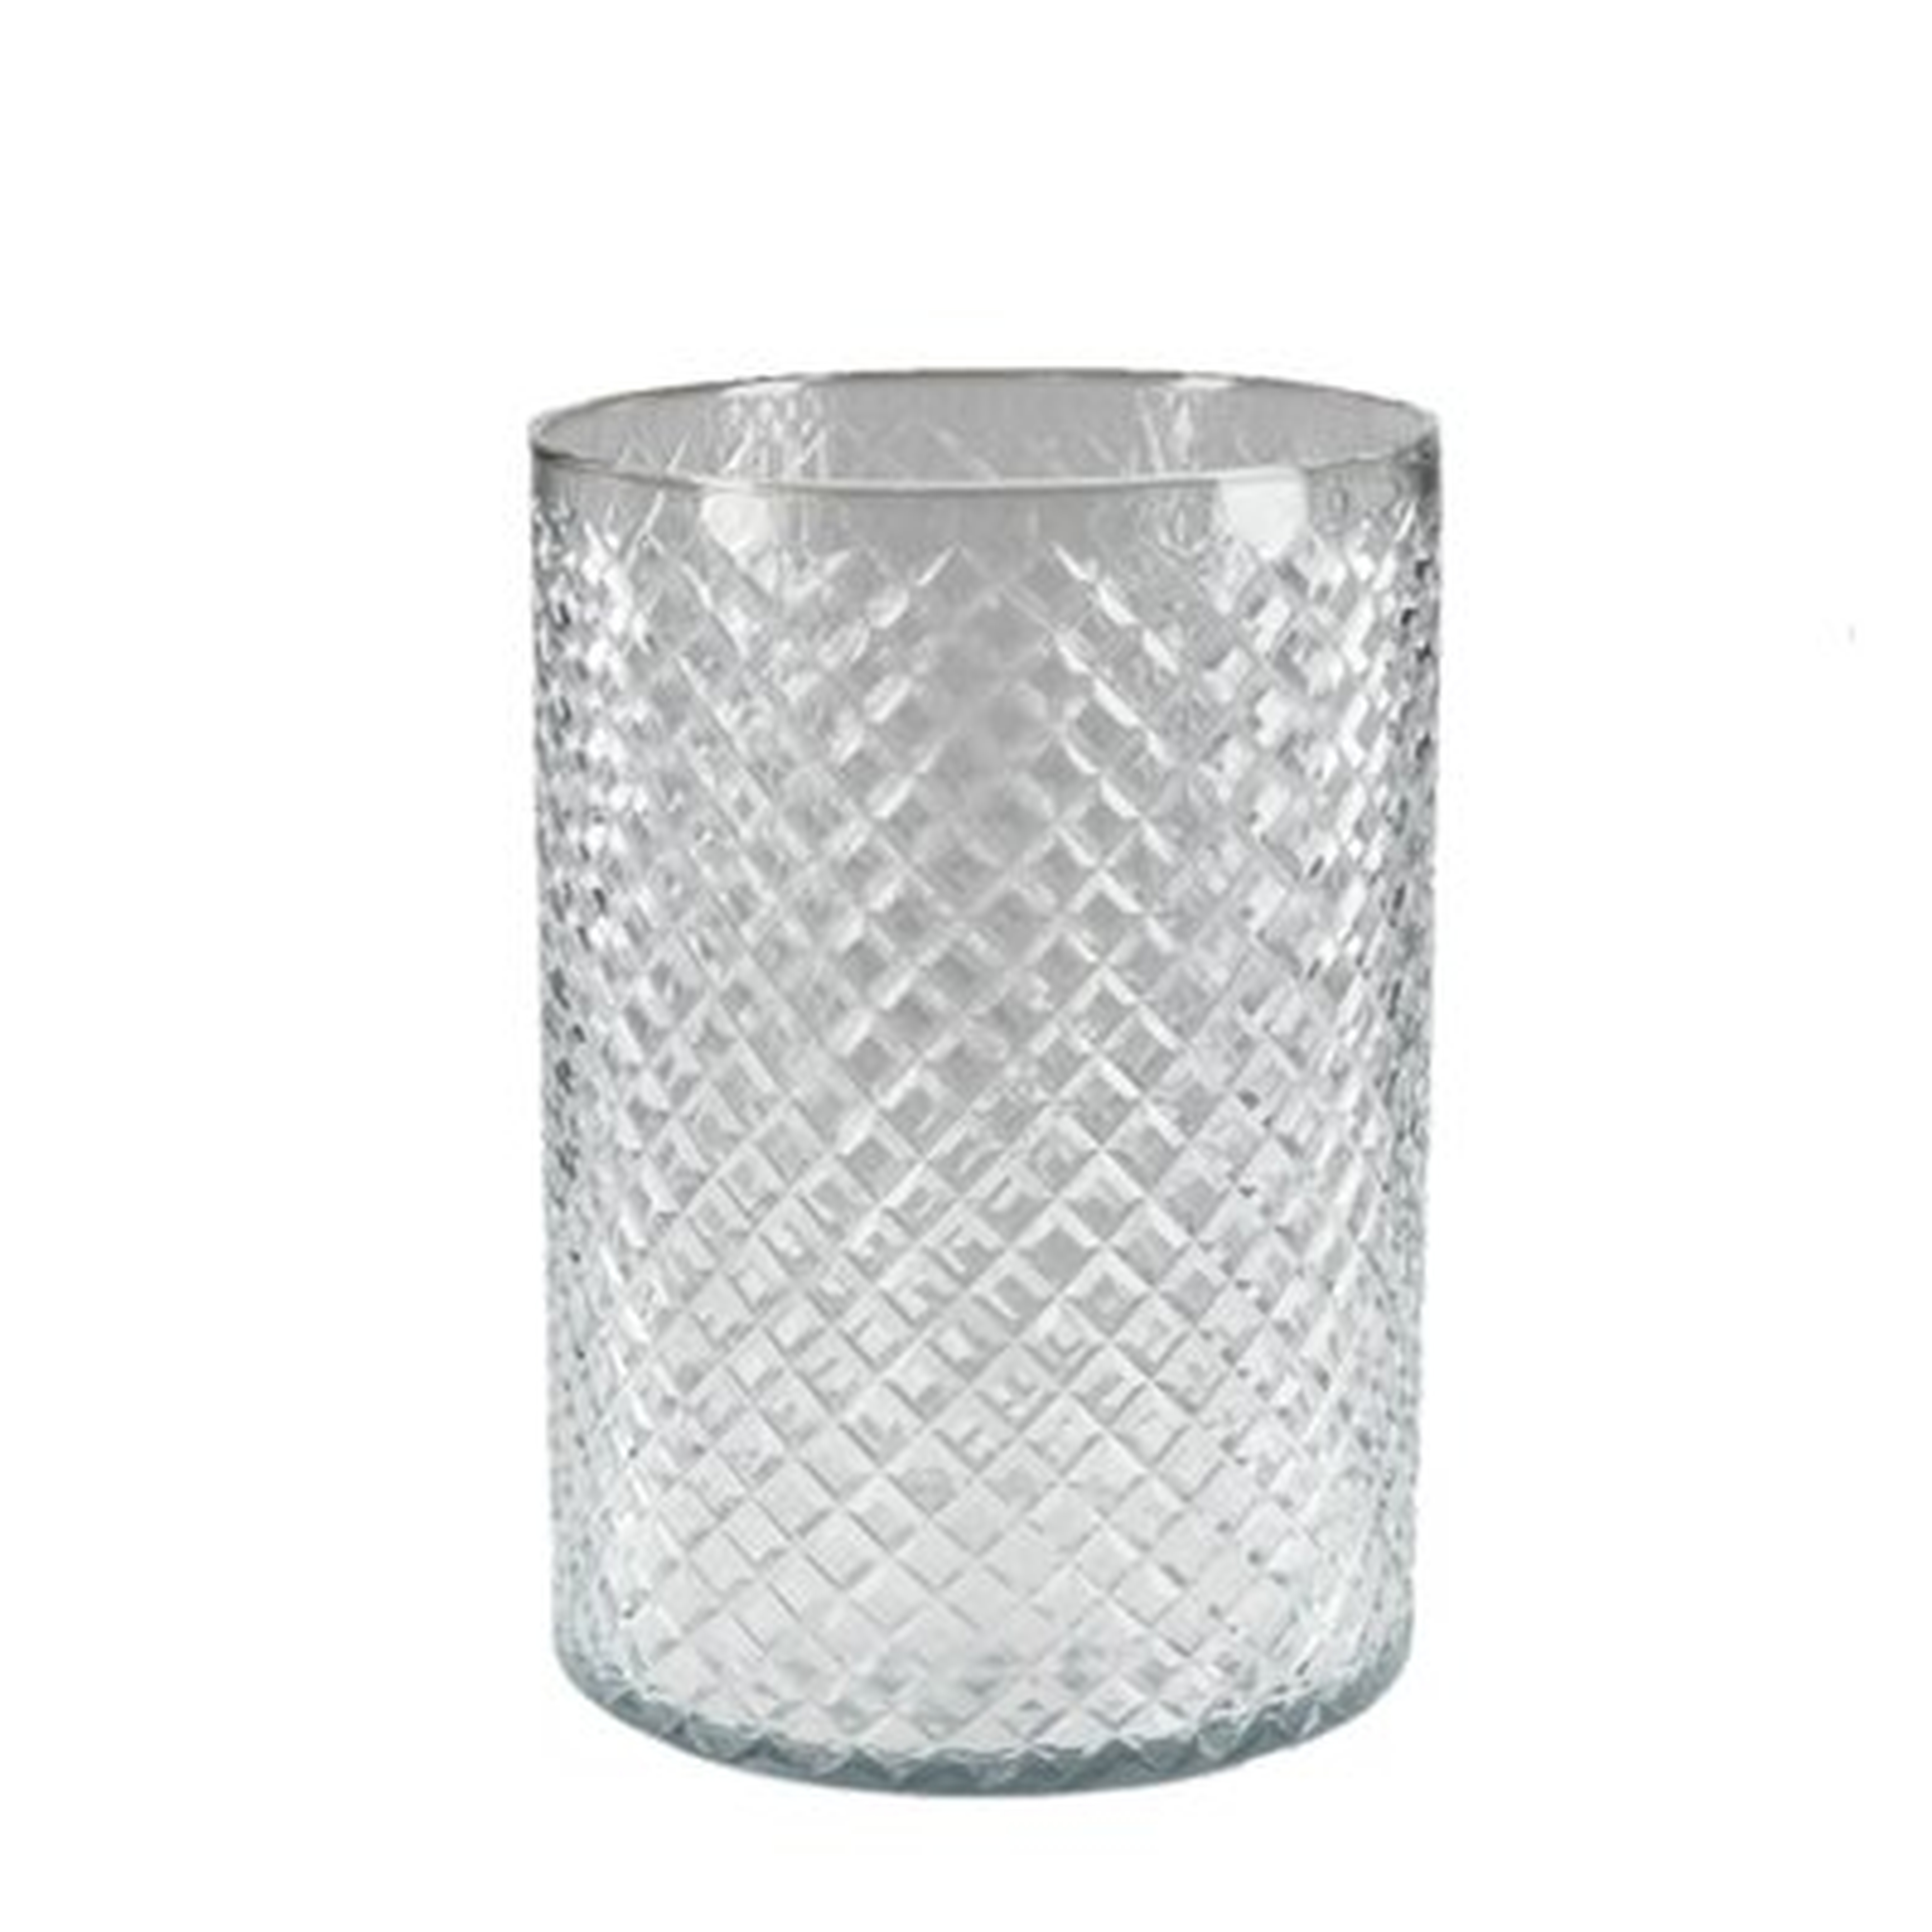 Mercer41 Tall Diamond Cut Glass Flowers Vase, Simple Table Centerpieces For Wedding, Event, Party, Decorative Glass For Home Decor, Measures 9" Tall & 6.25" Diameter - Wayfair